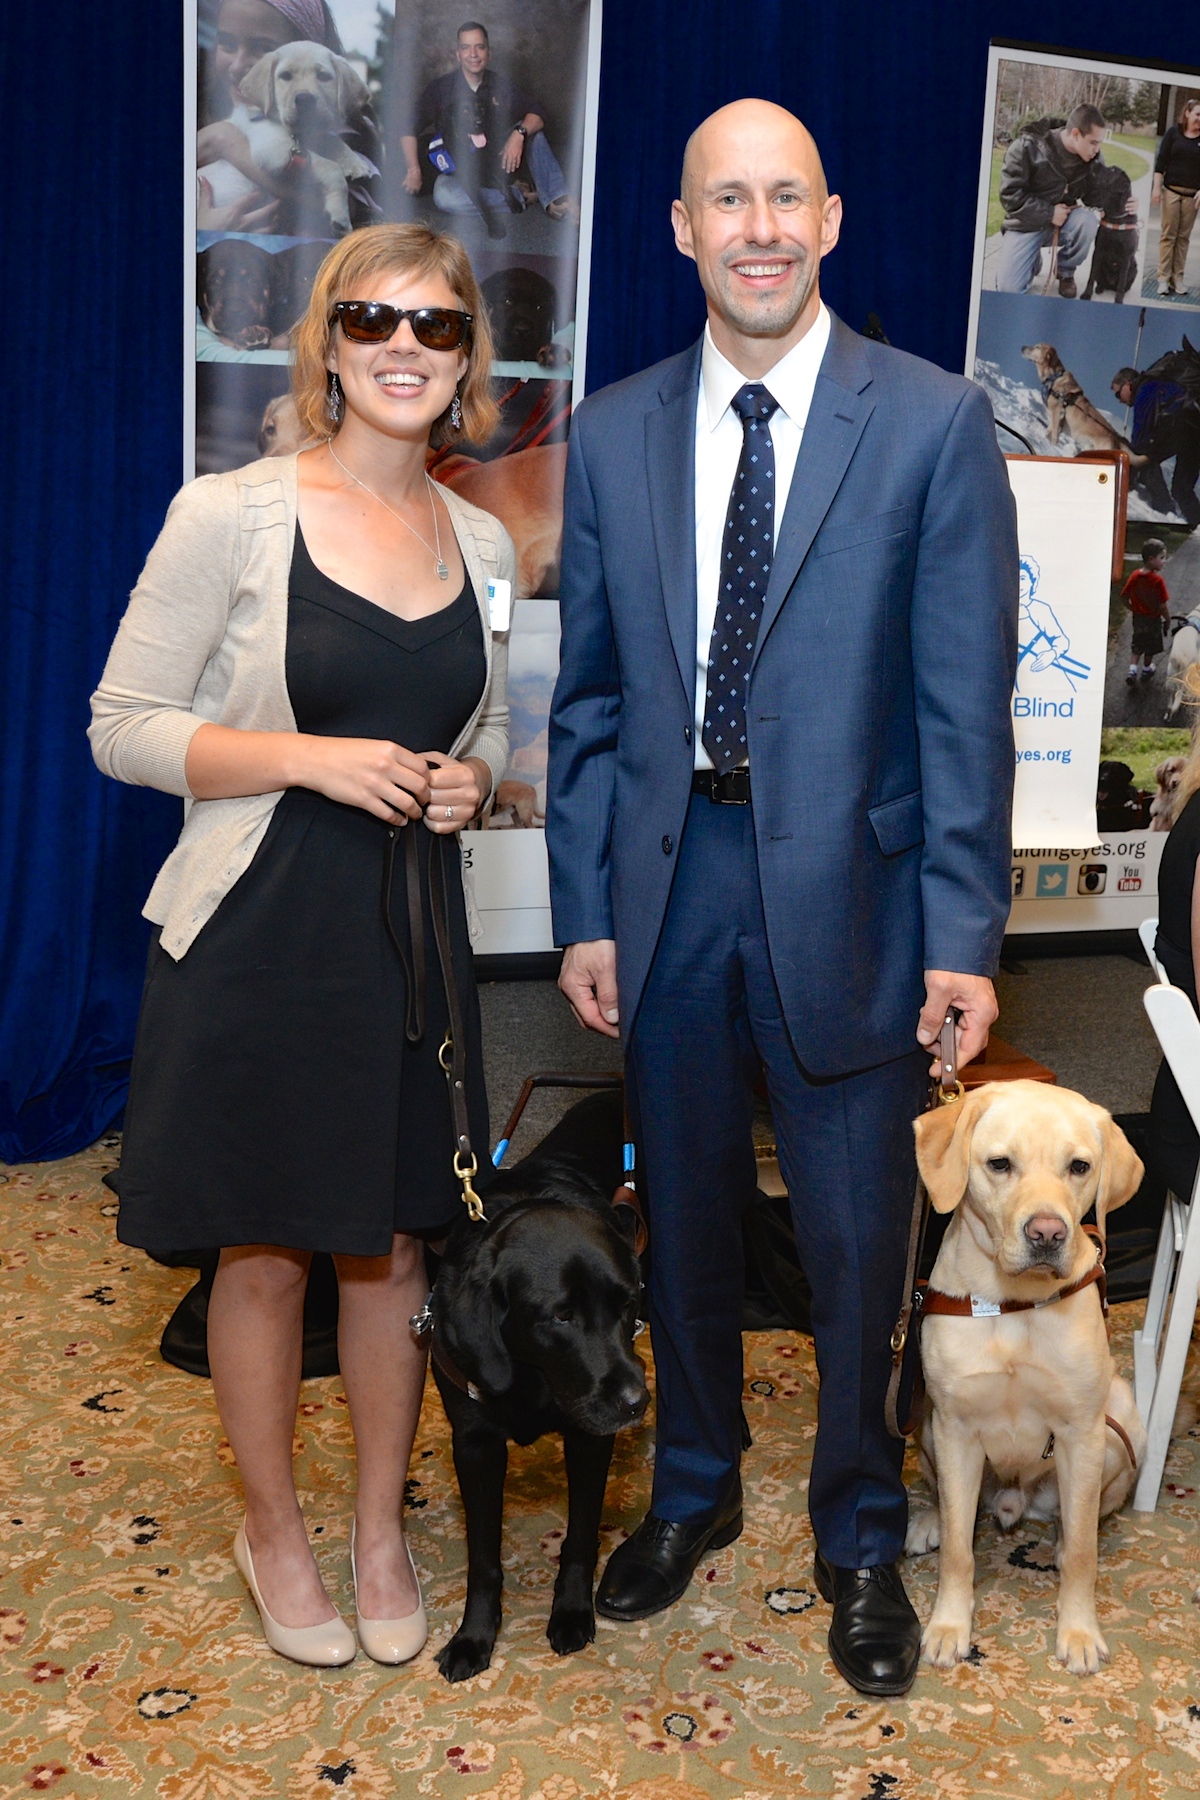 Guiding Eyes graduate Abbey Lanier and Thomas Panek (of South Salem), president & CEO, with Guiding Eyes dogs Alexa (left) and Gus at the 37th annual Guiding Eyes for the Blind Golf Classic.